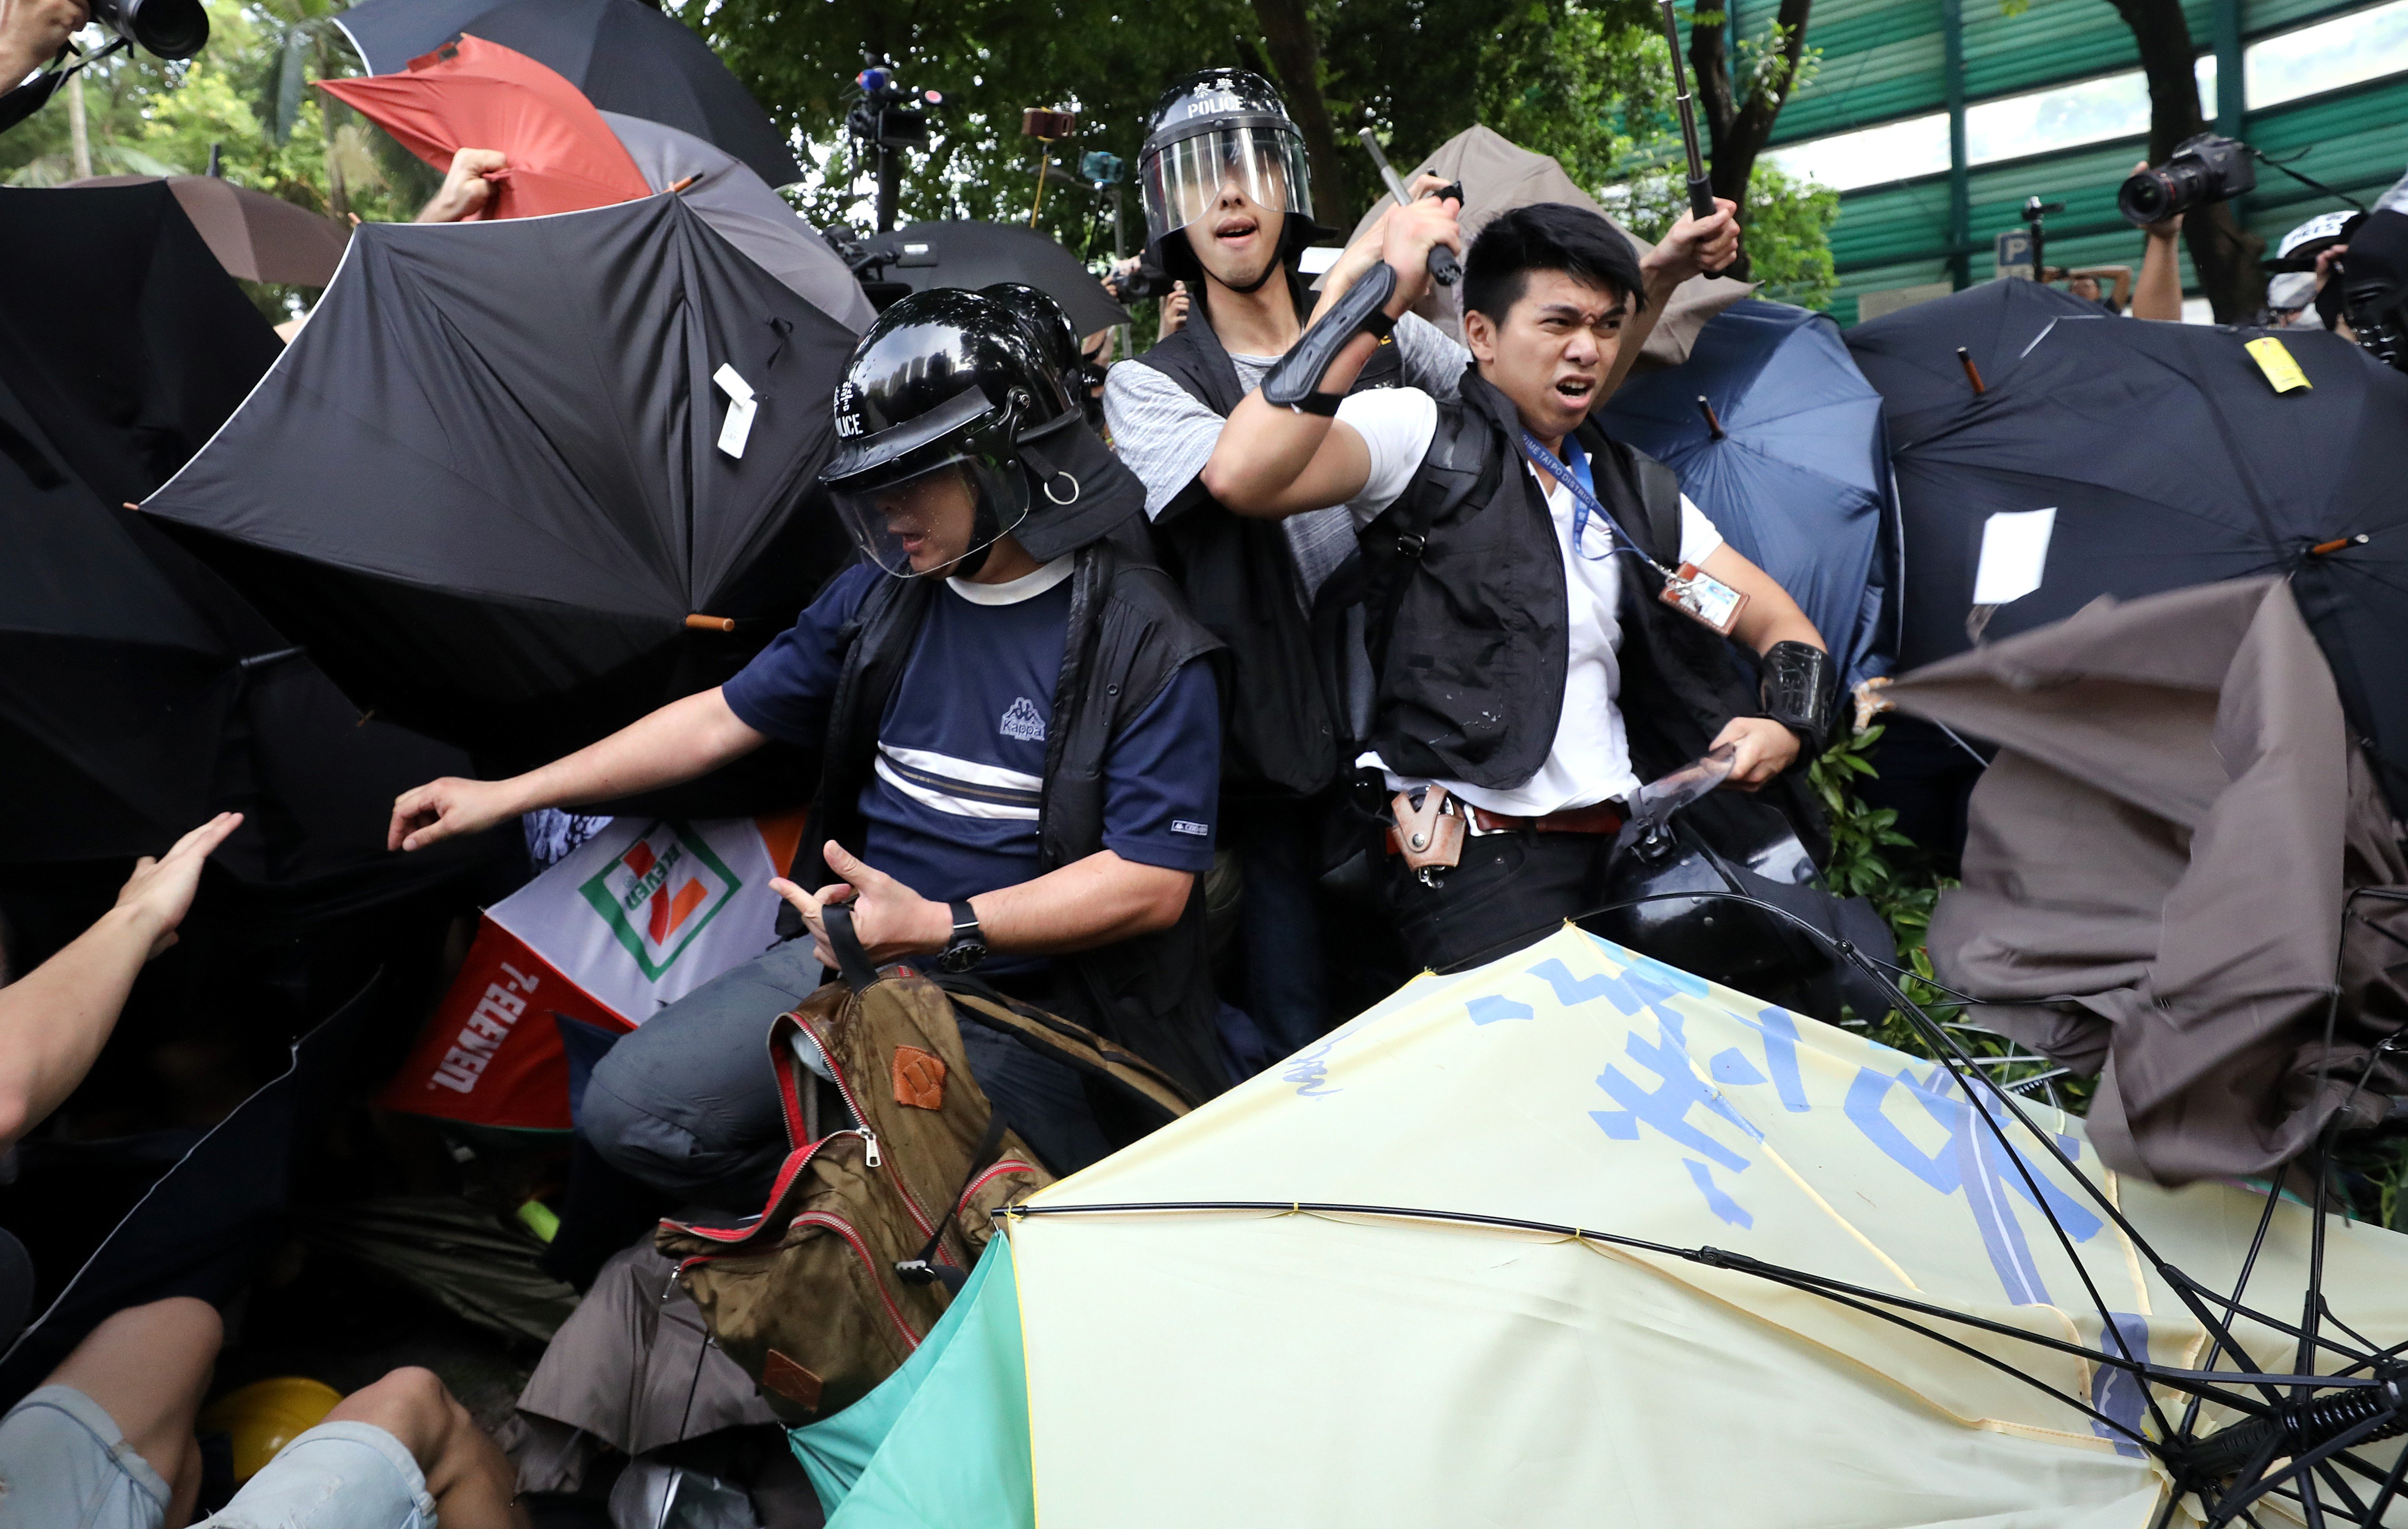 Police officers are surrounded and attacked by protesters in Sheung Shui. Photo: Dickson Lee